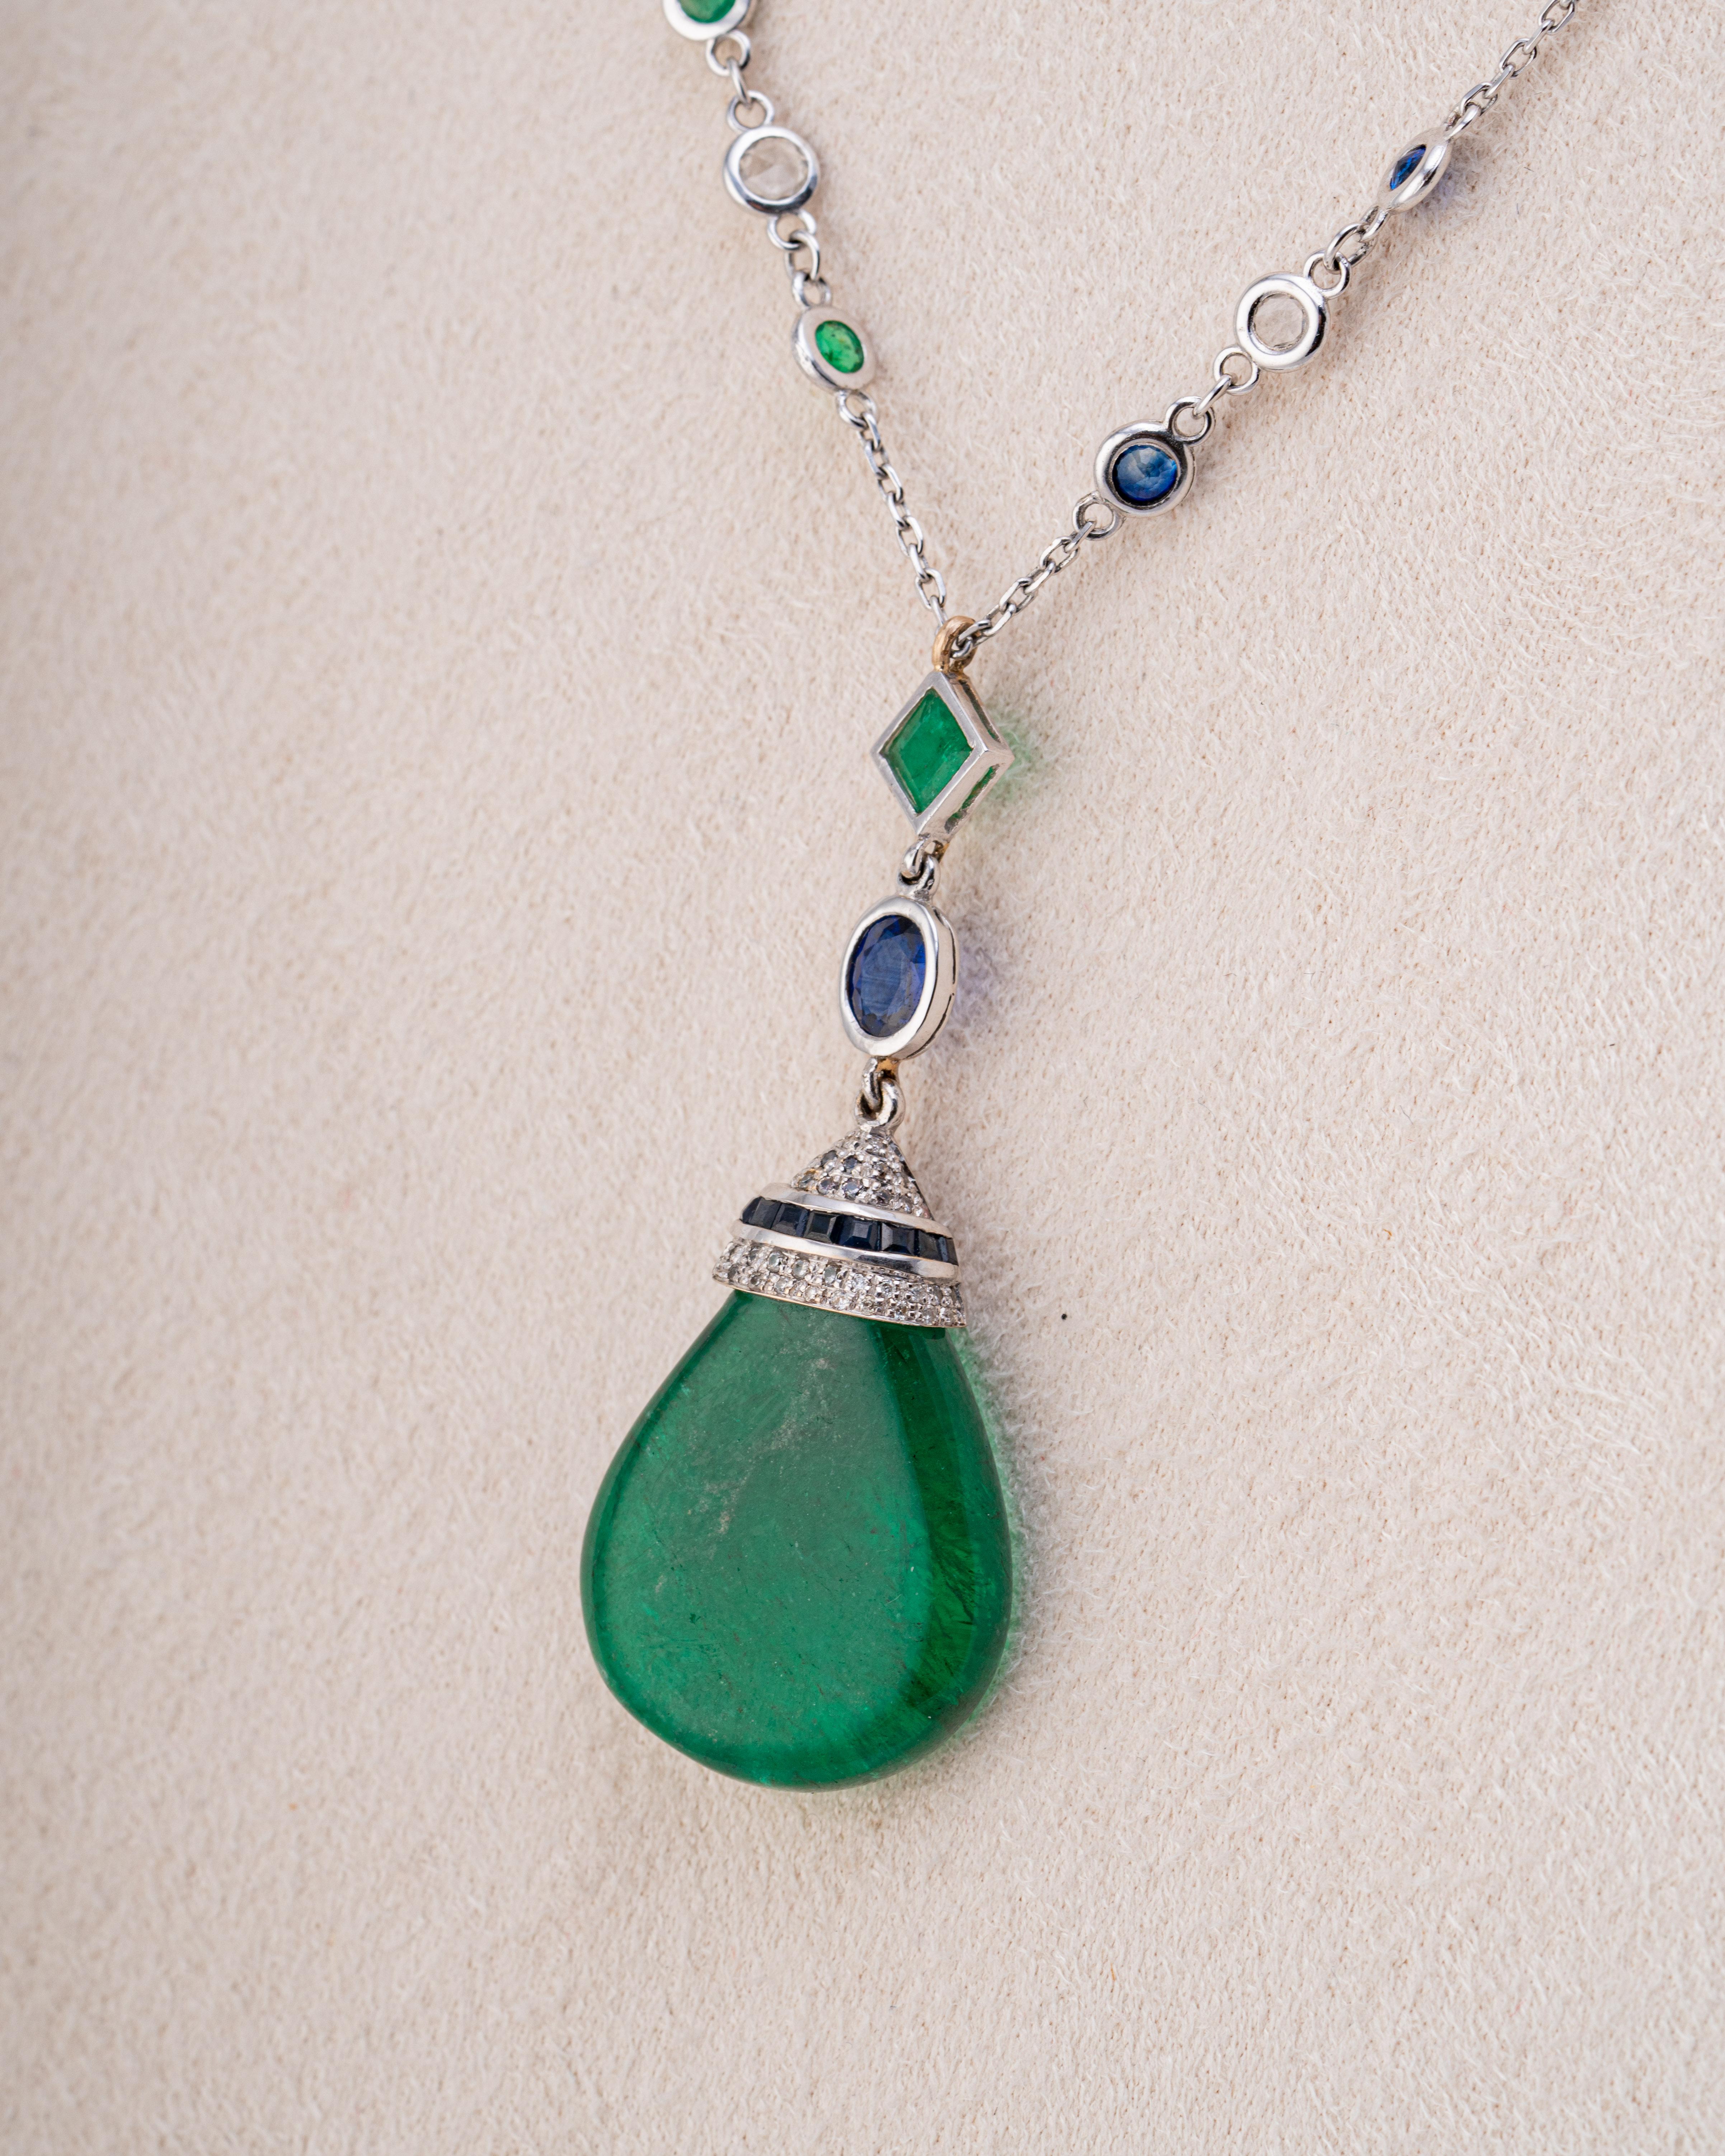 A very unique 23.95 carat drop-shaped Emerald pendant, with Emeralds, Sapphires and White Diamonds - set in 10 grams of solid 18K White Gold. The chain is currently 24 inches long, but it can be customized. The green and blue color combination makes